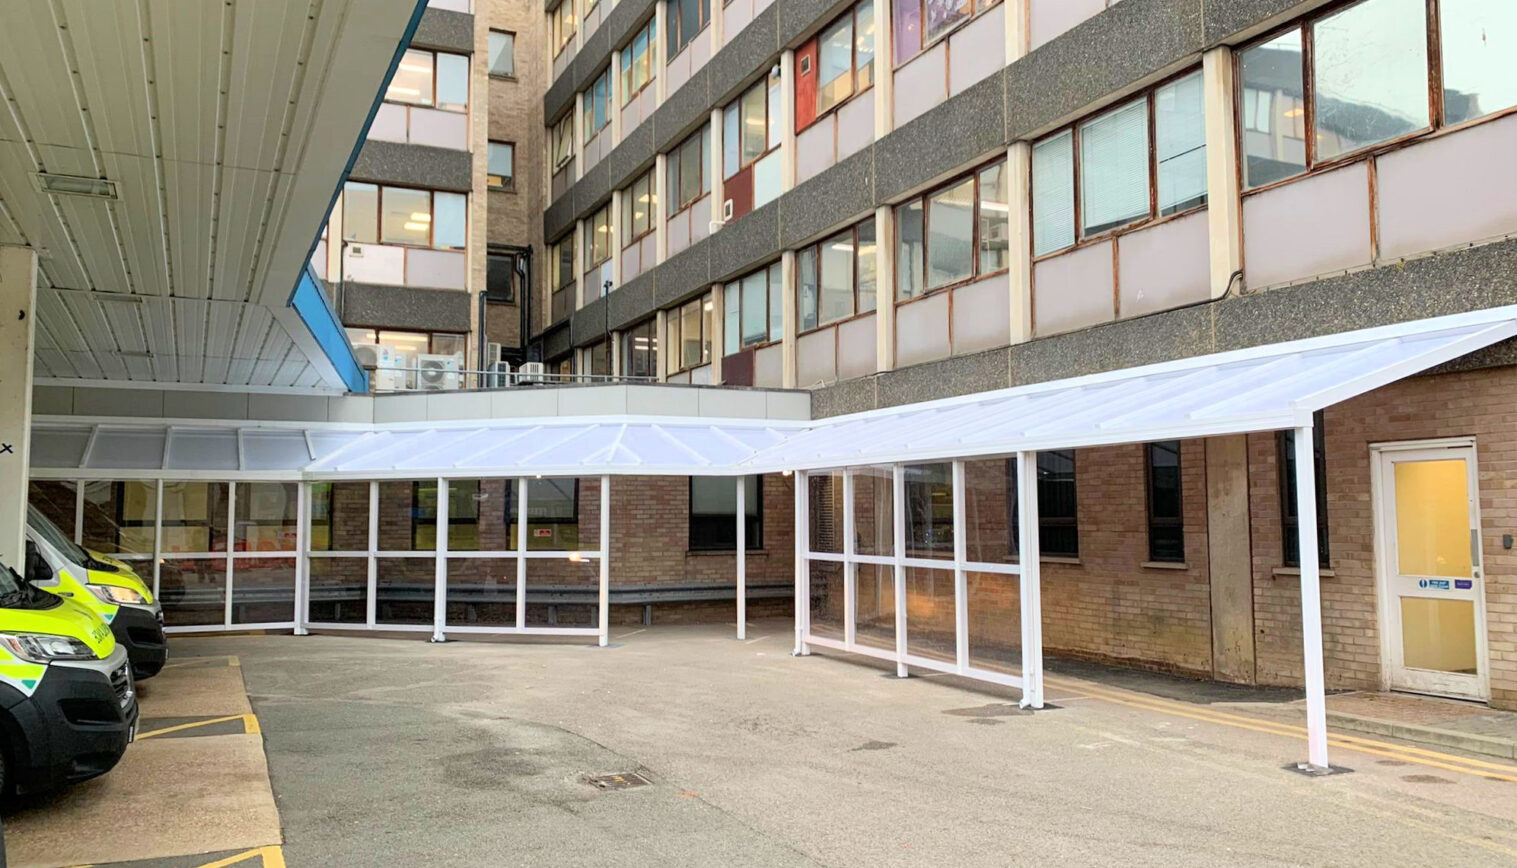 Make the Most of Your Outdoor Space This Winter with Canopies